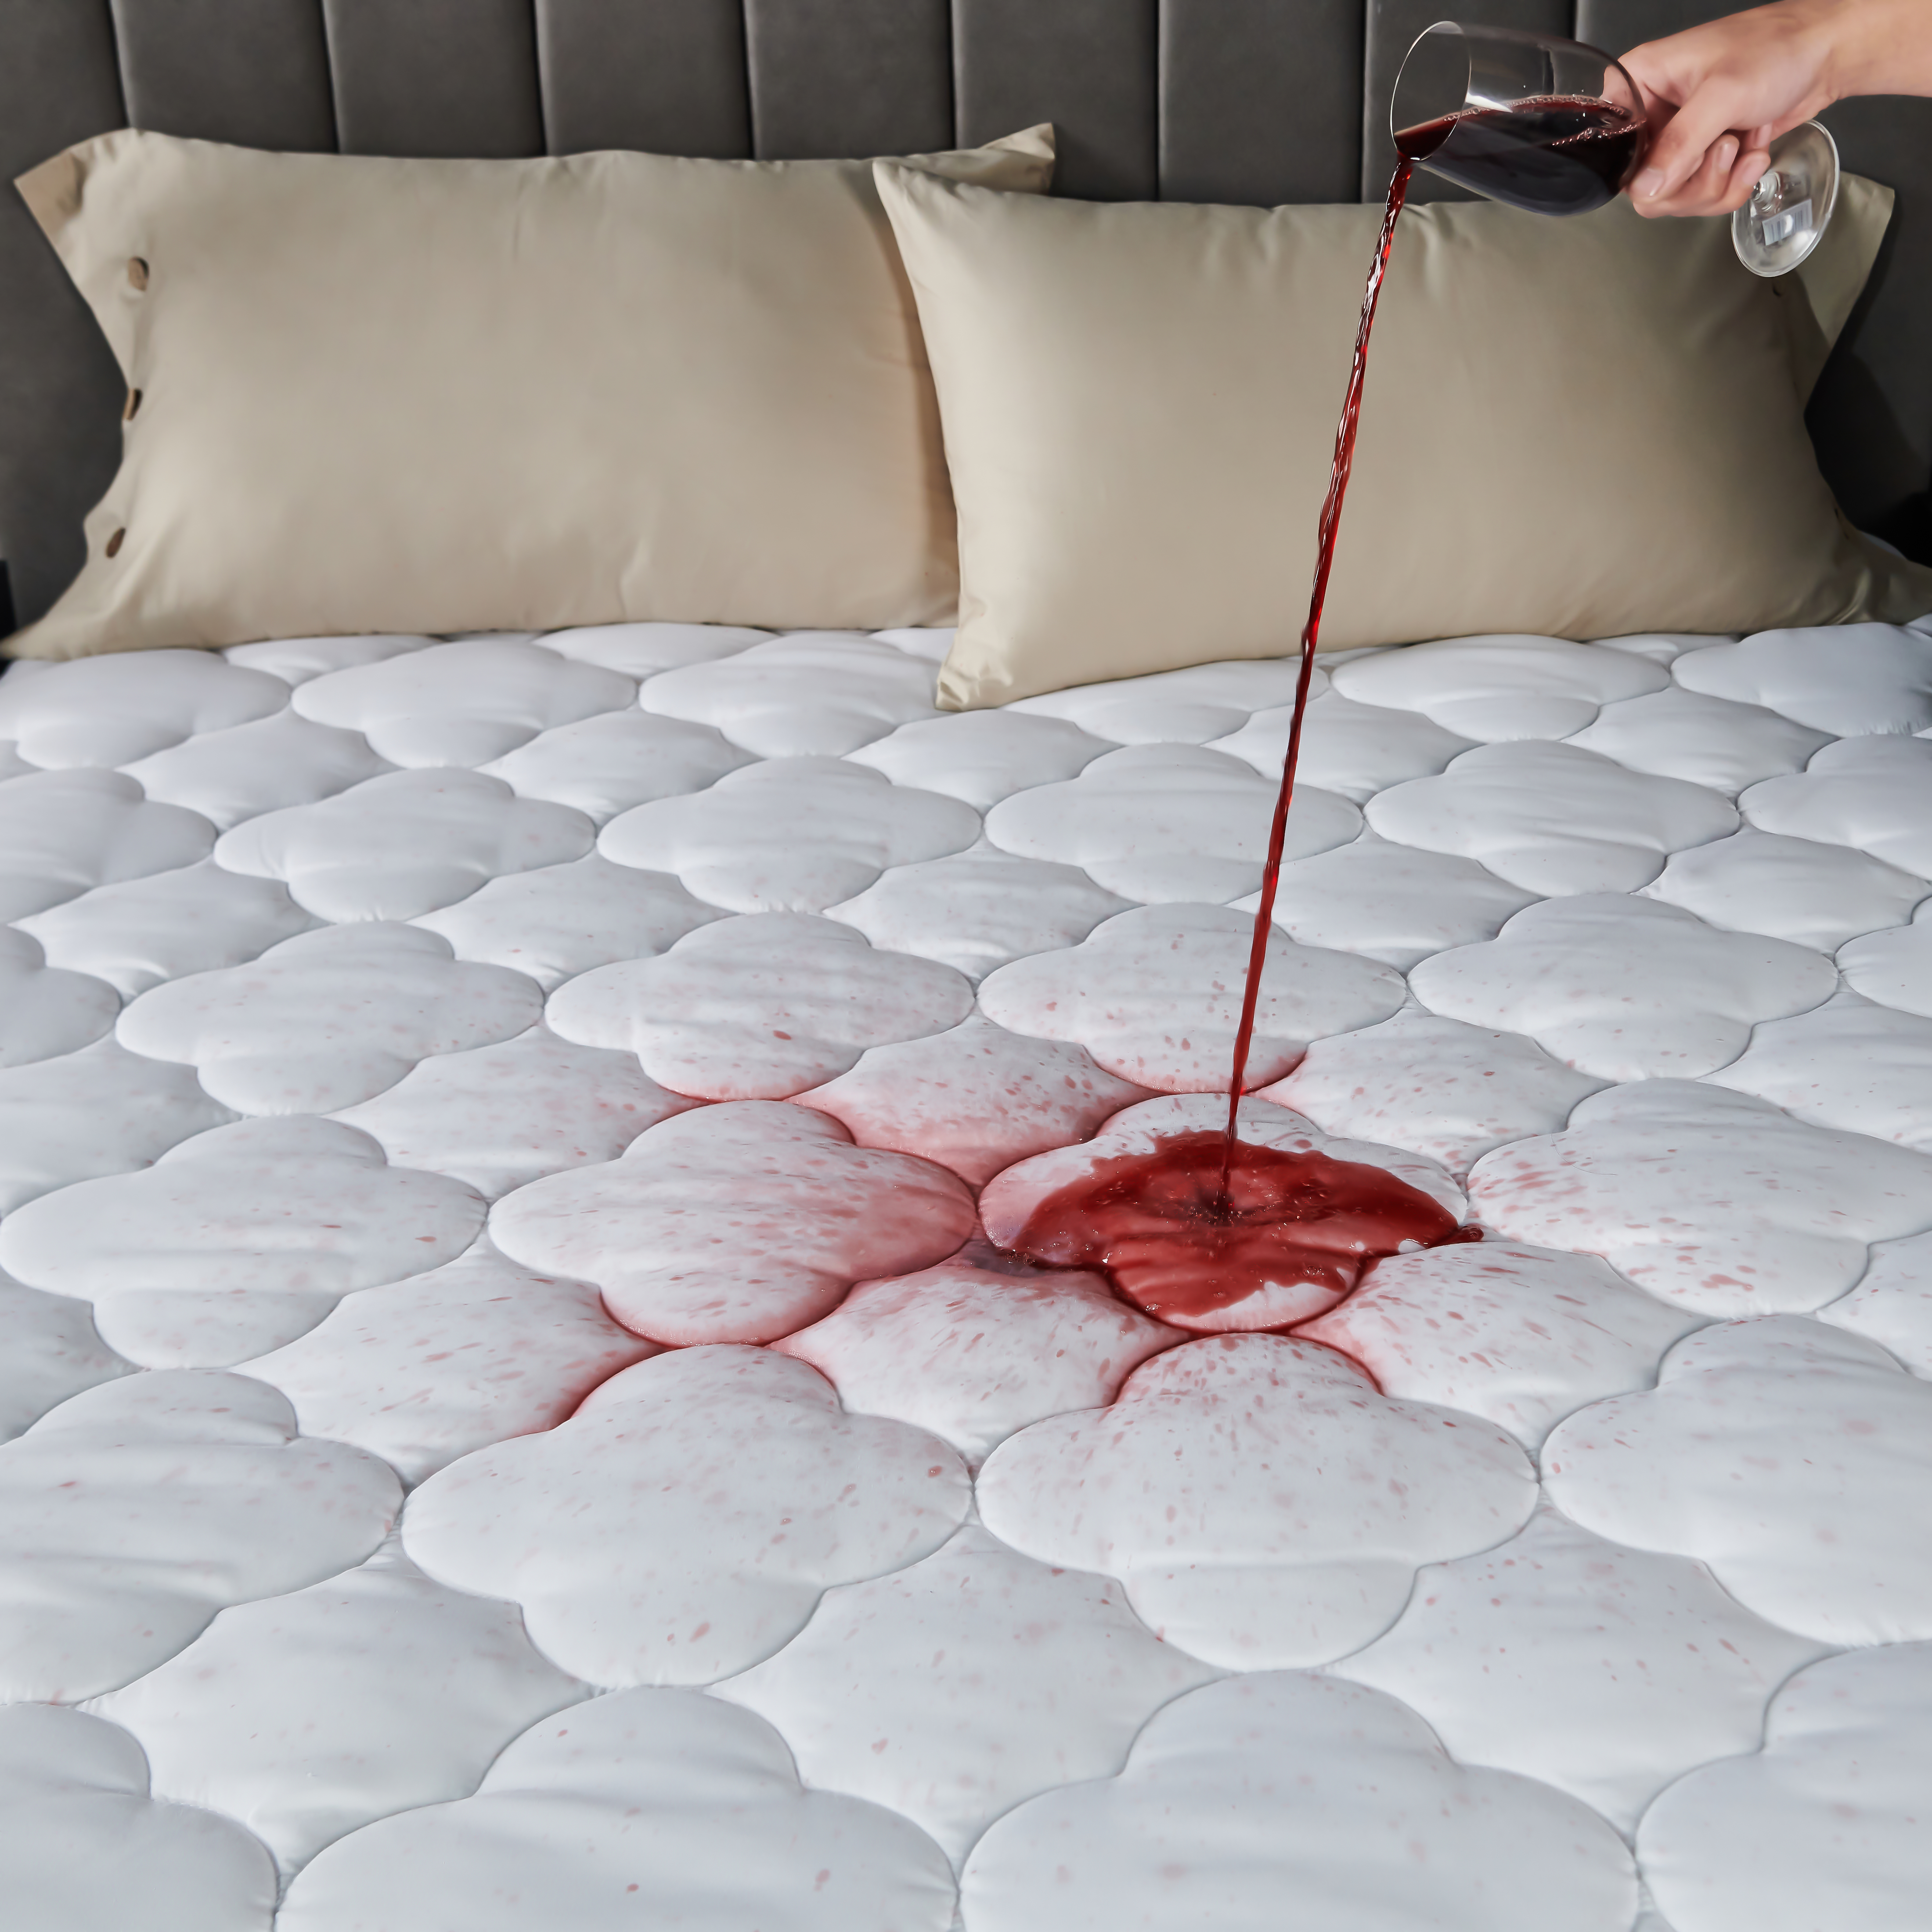 One-needle Quilted Waterproof Mattress Protector